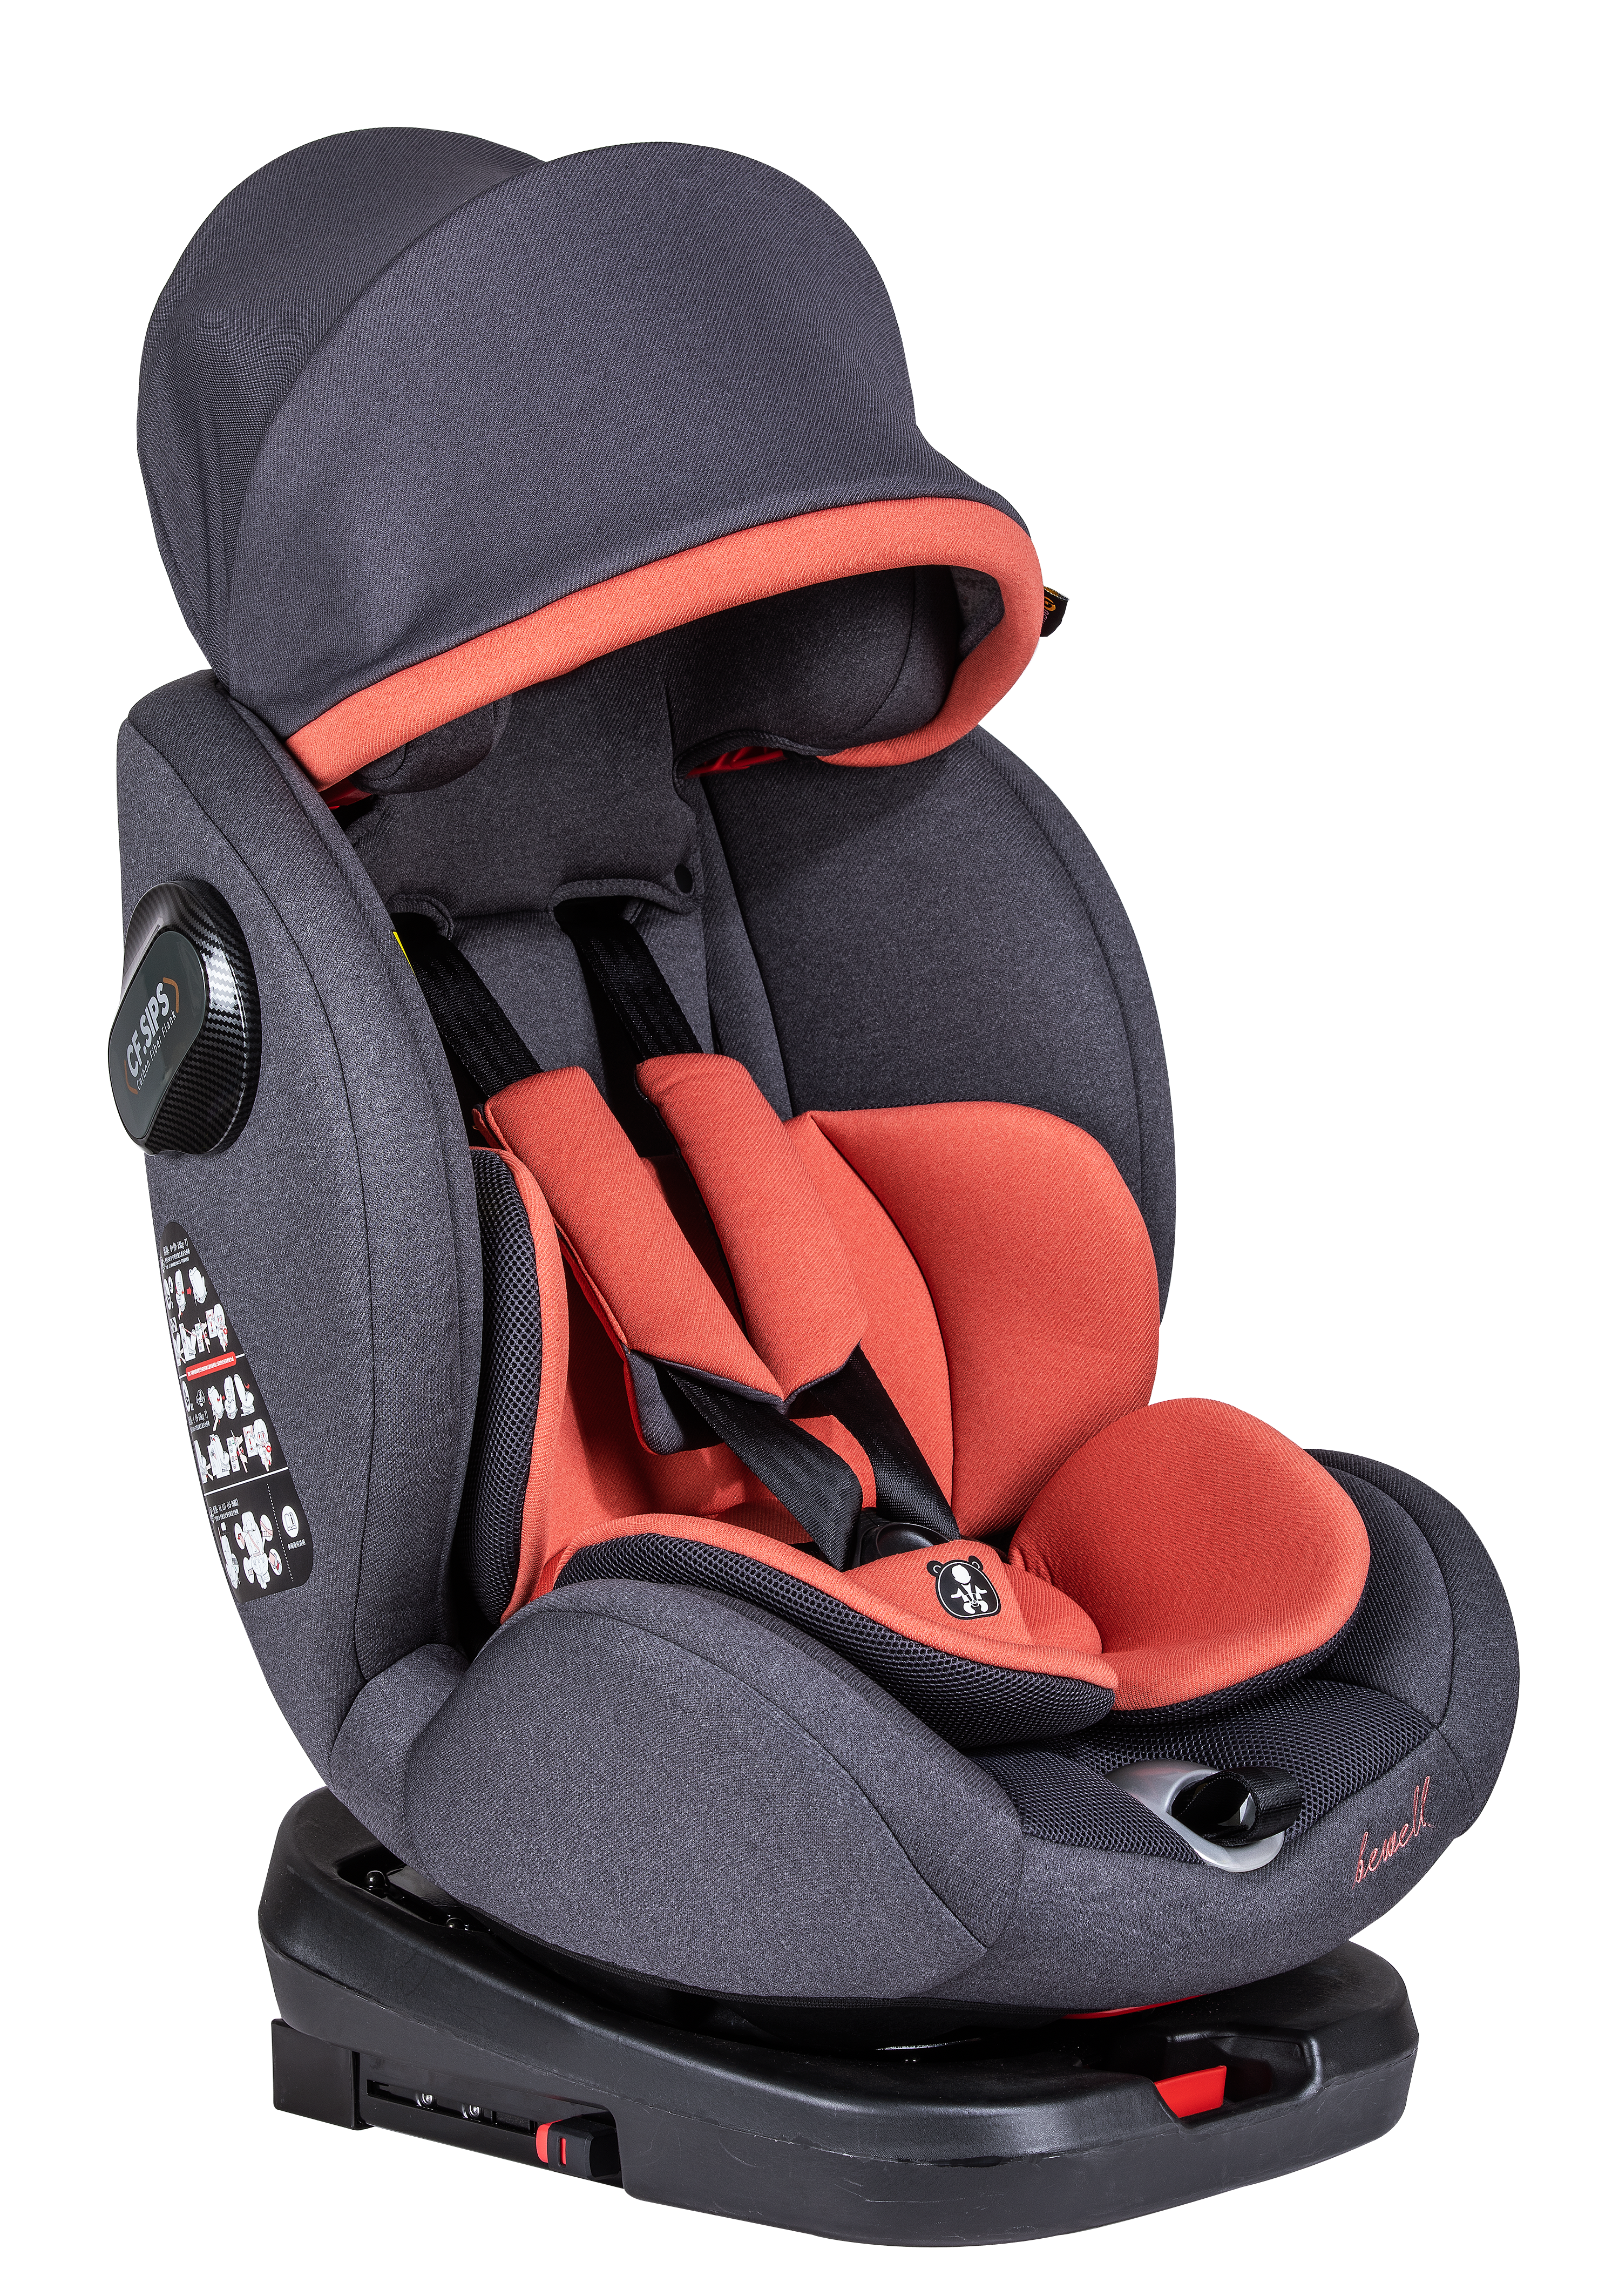 All In One Orange 4 Years Old Baby Car Seat